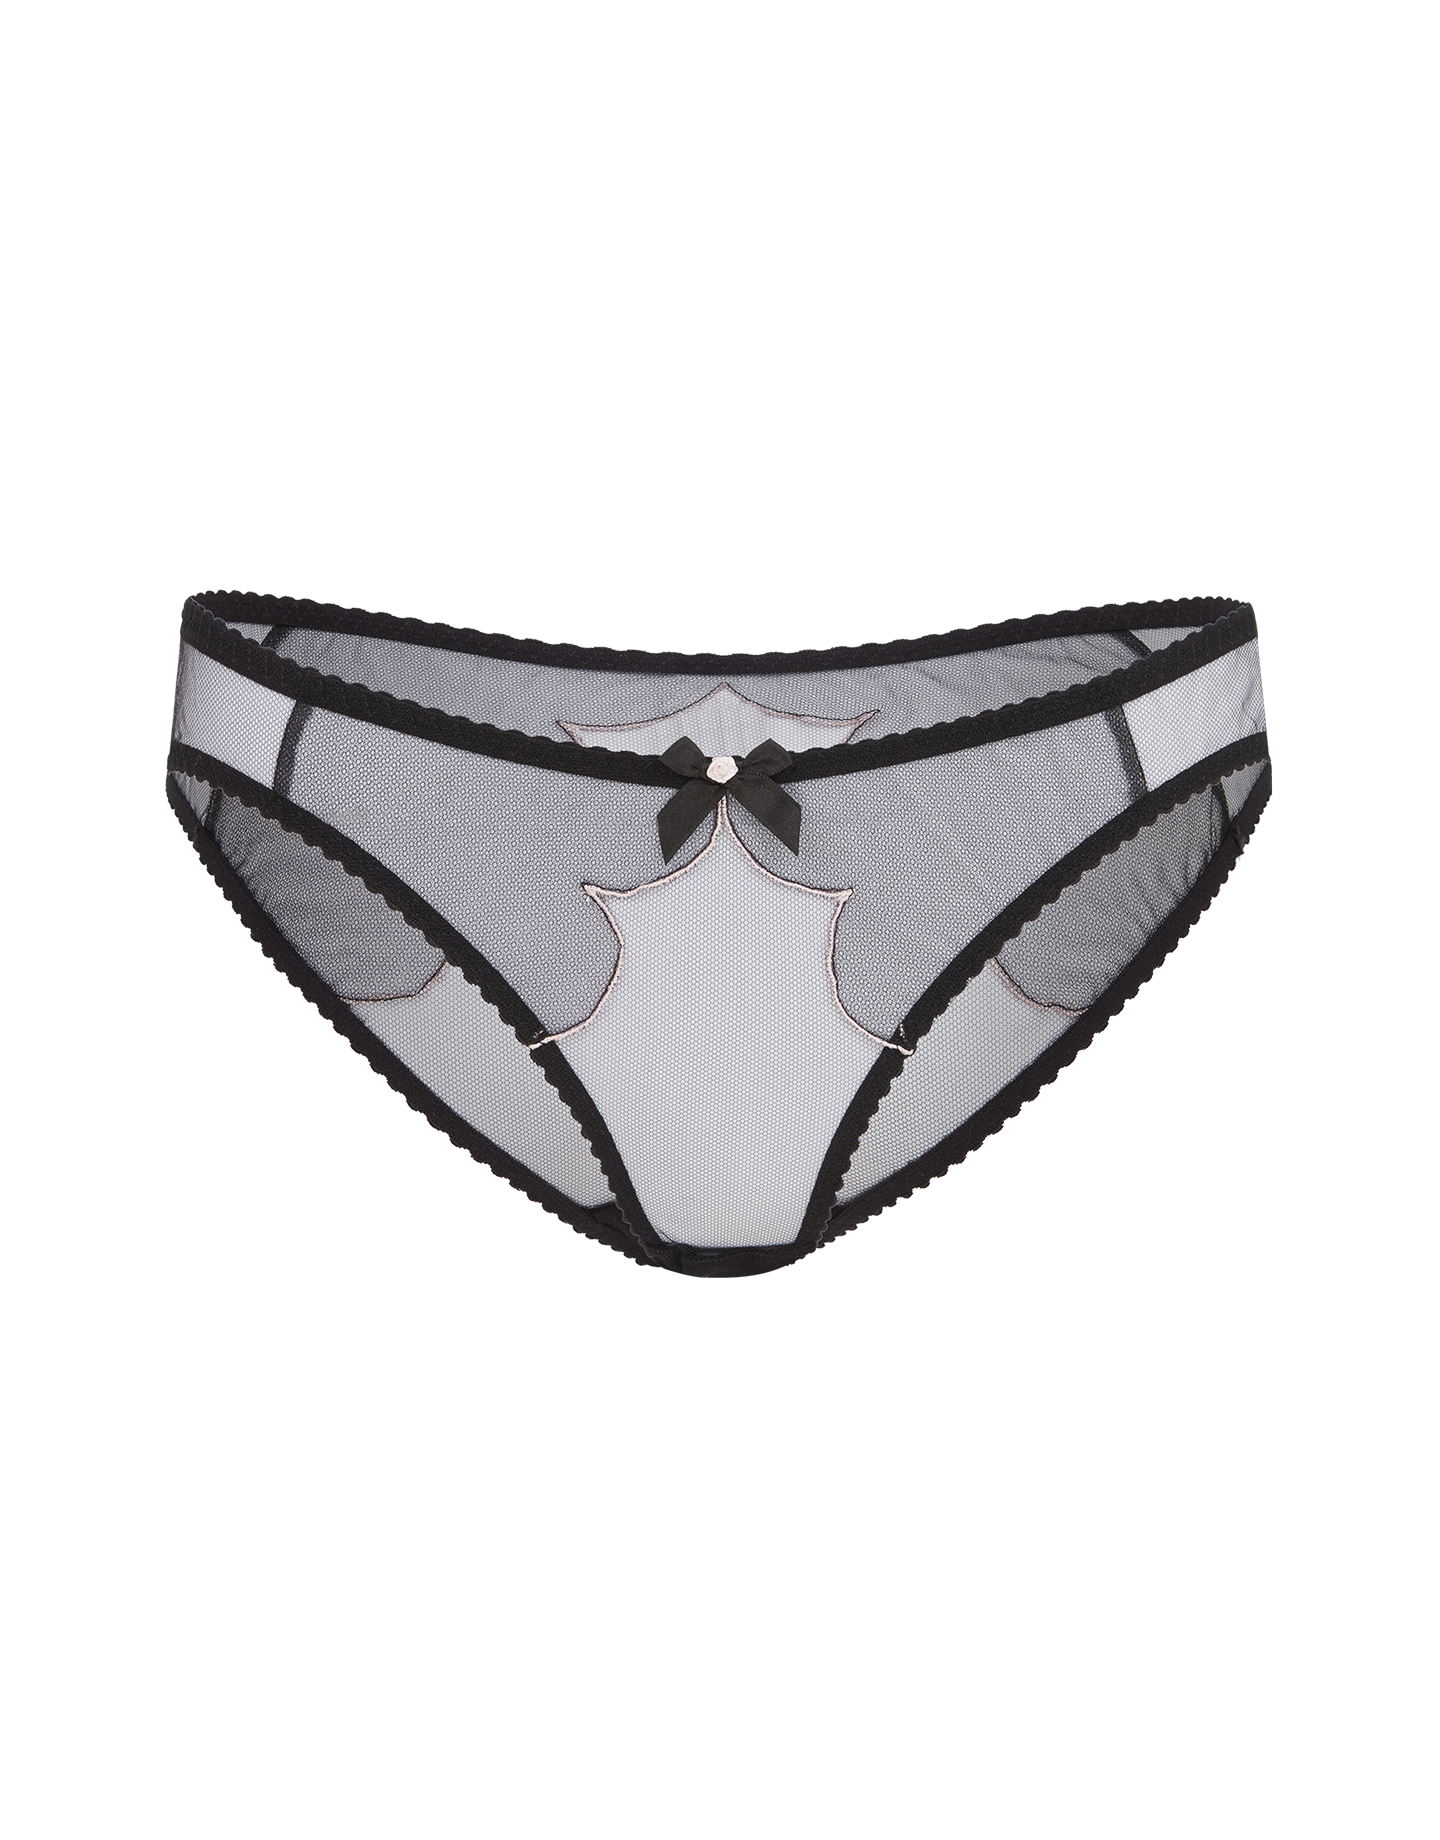 Lorna Full Brief in Black | Agent Provocateur All Lingerie - Wishupon